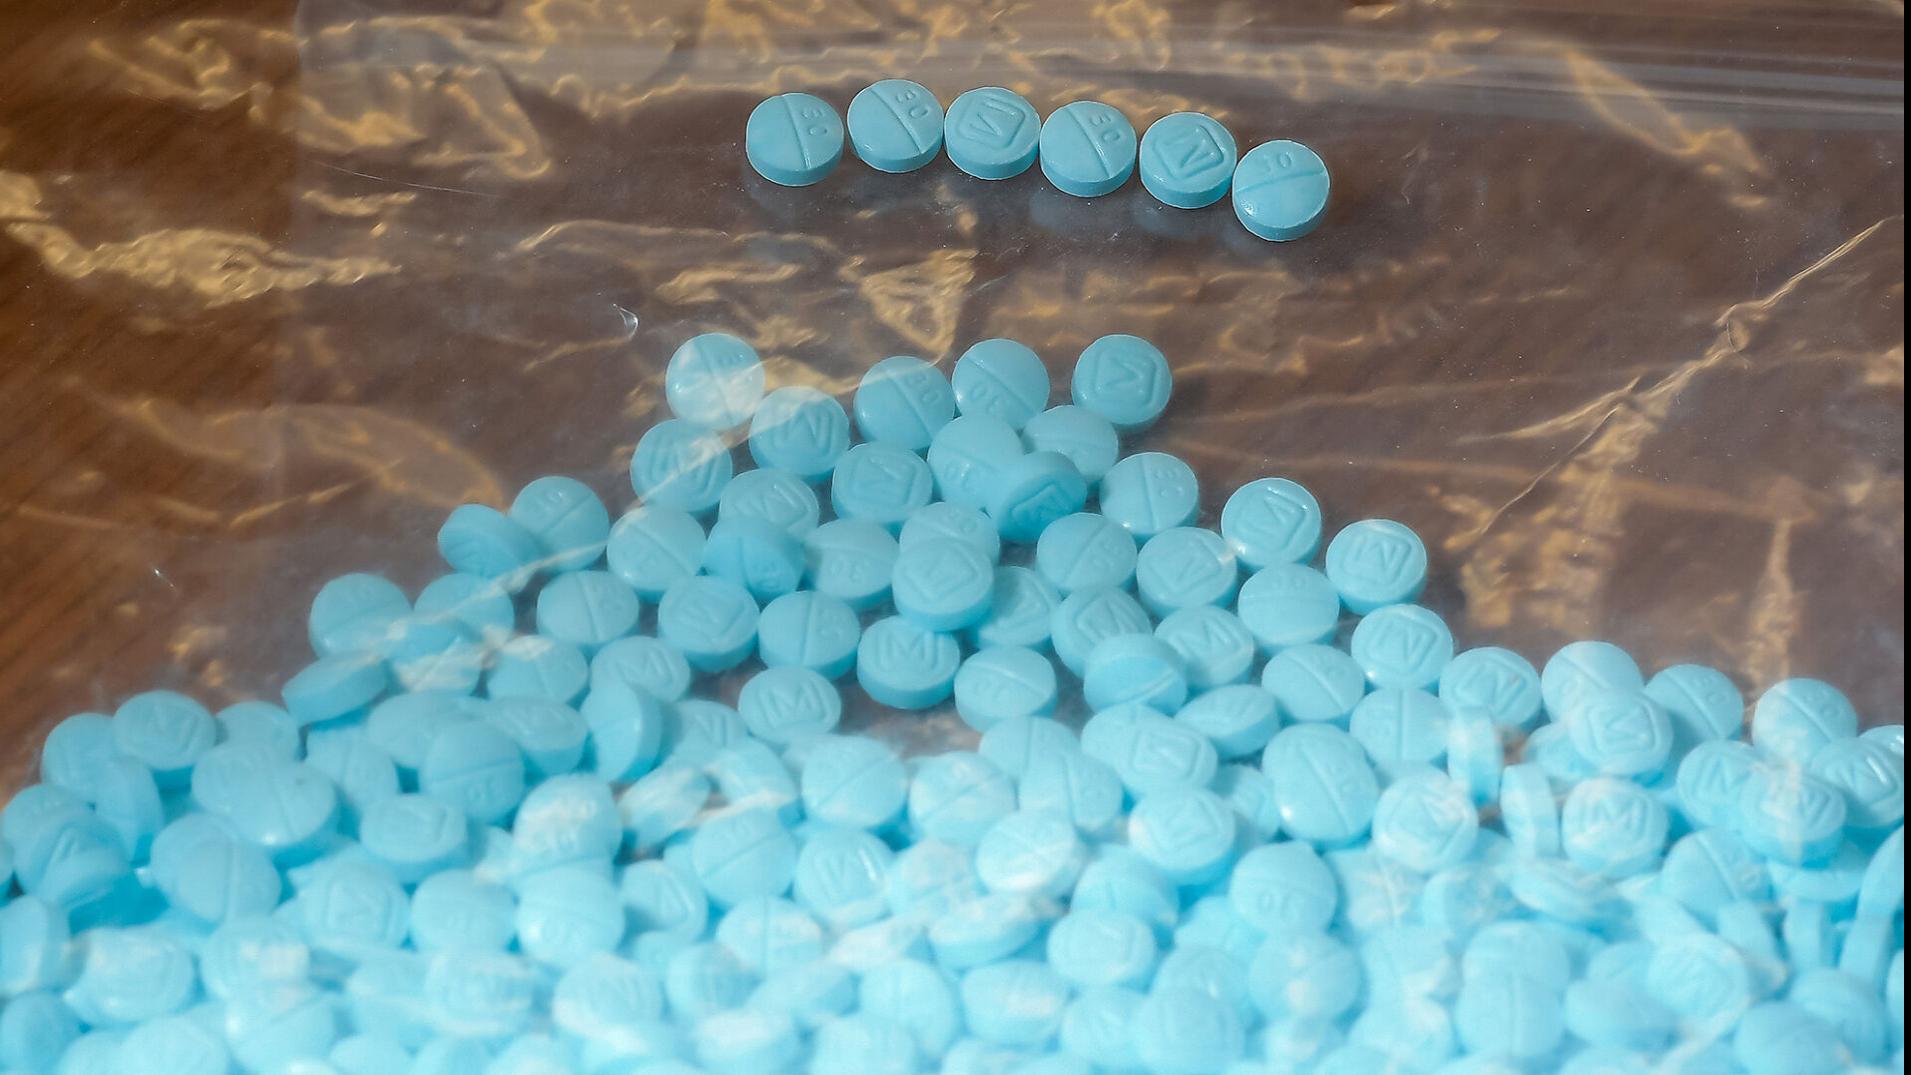 Deadly fentanyl forces rewrite of Nevada drug laws